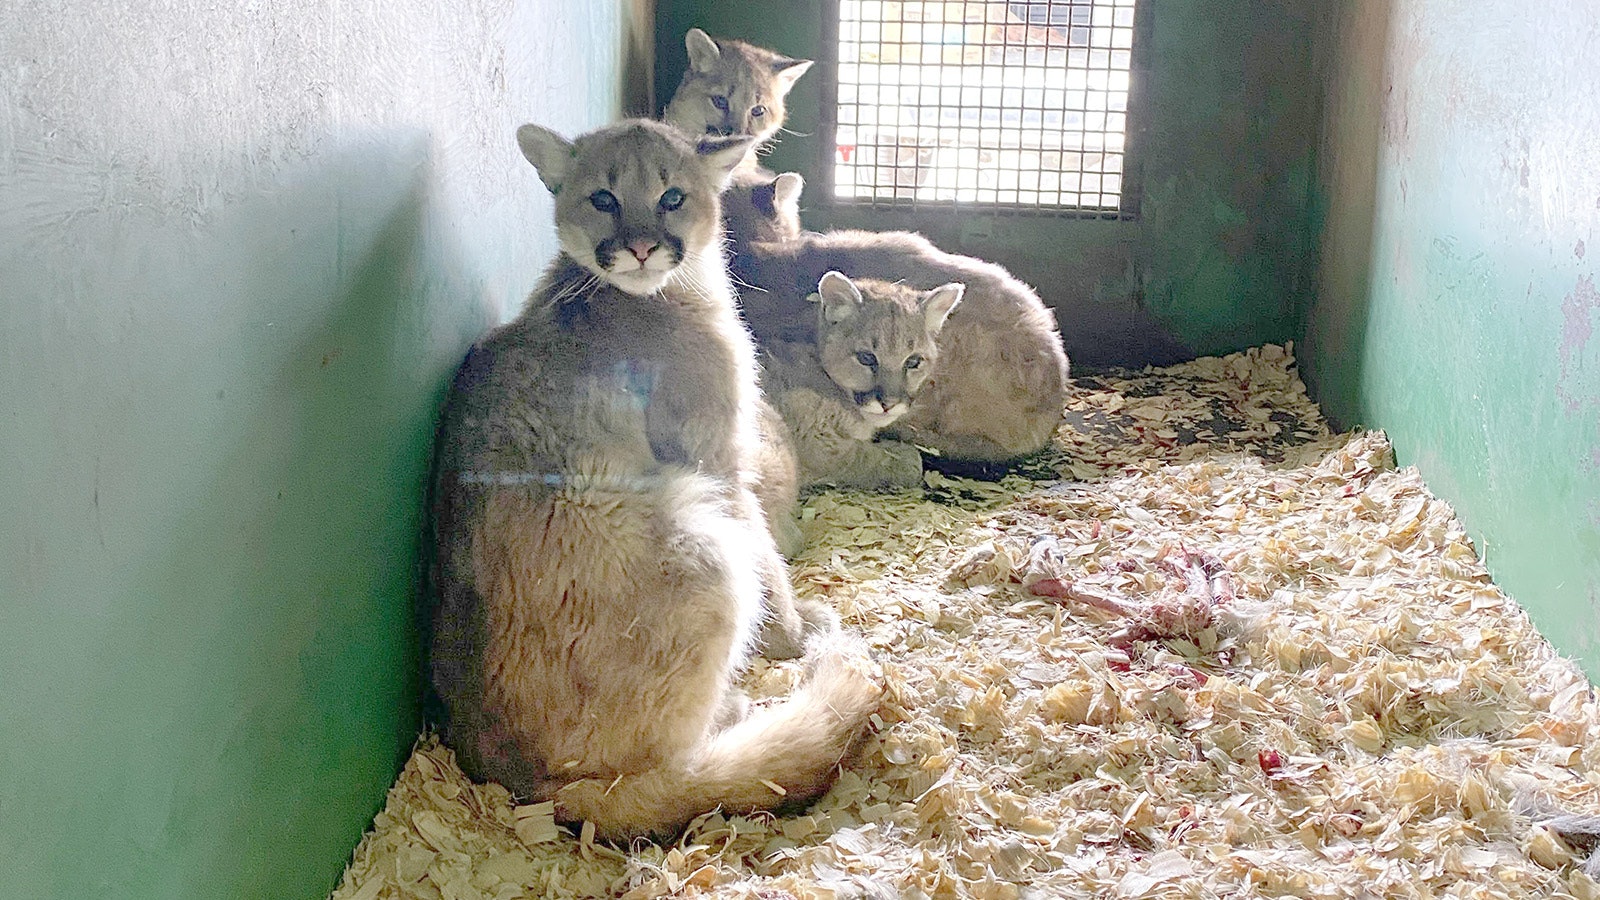 Wyoming Game and Fish Department wardens captured four orphaned 6-month-old orphaned mountain lion cubs near Pinedale last year. They were taken to the Bear Country USA zoo in South Dakota.